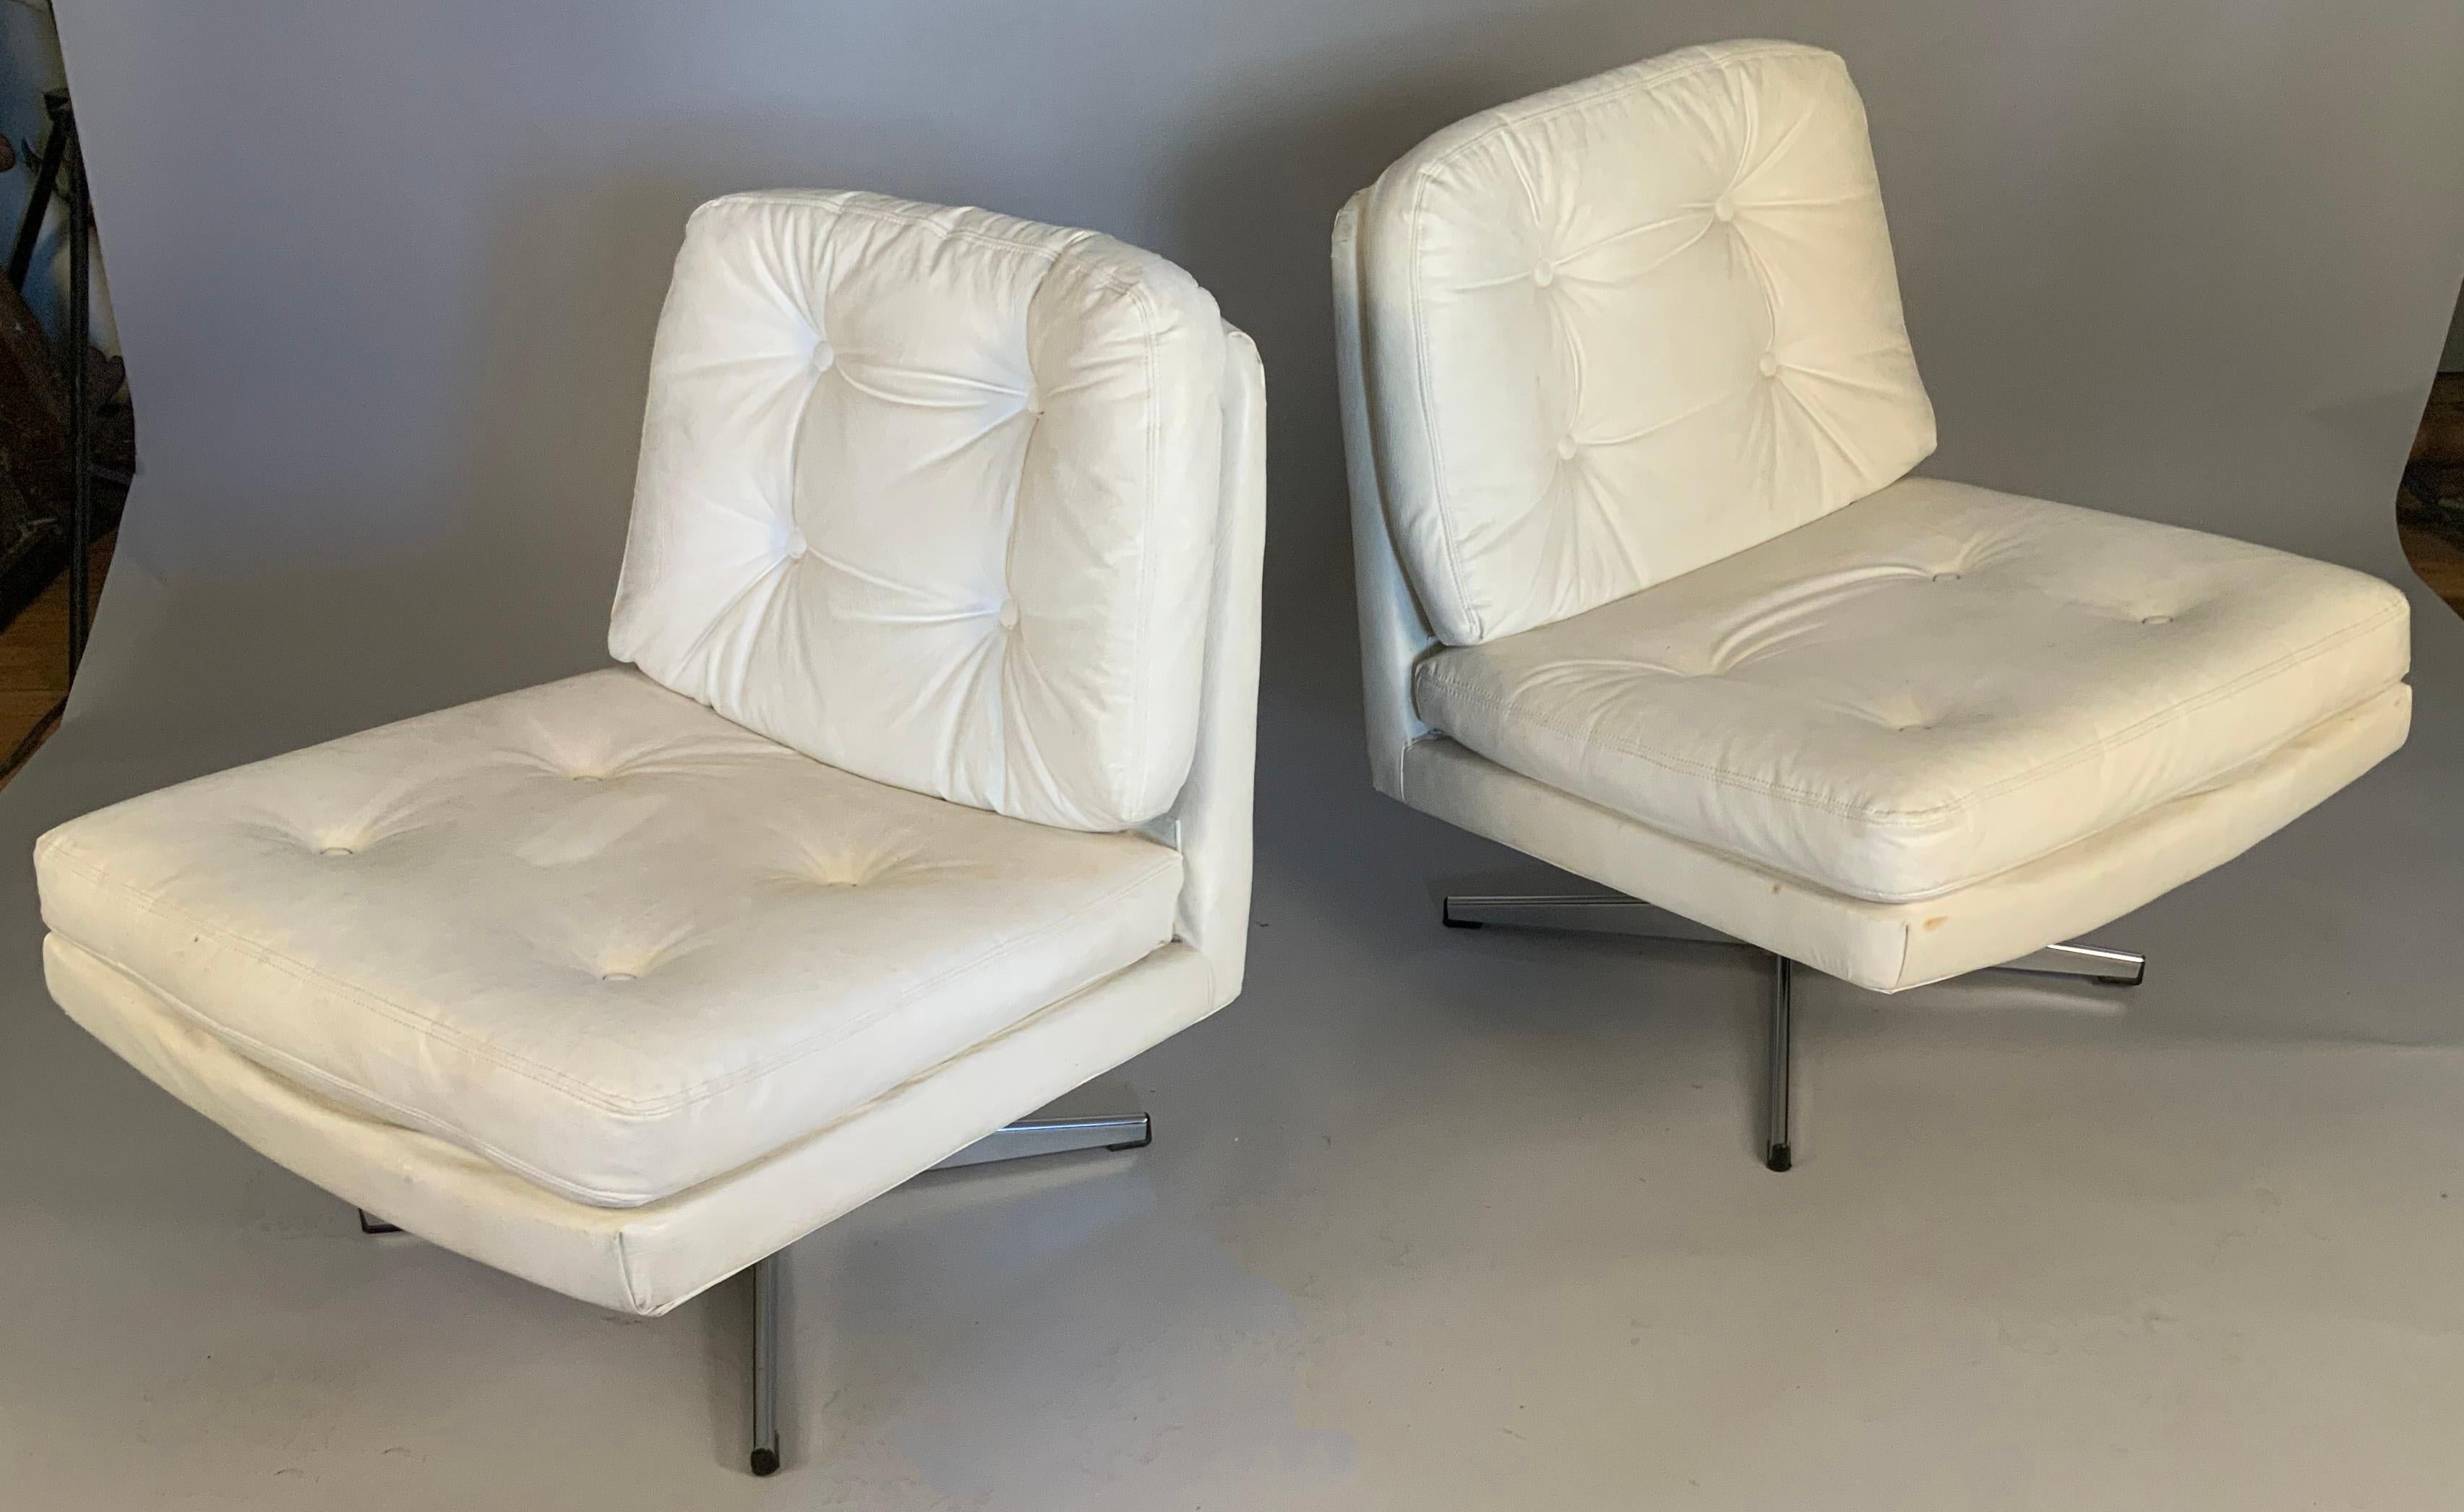 A pair of classic modern vintage 1960's swivel lounge chairs, on chrome star bases. Beautiful scale and very comfortable. In their original white vinyl upholstery, which shows average wear for the period. Marked made in Sweden.